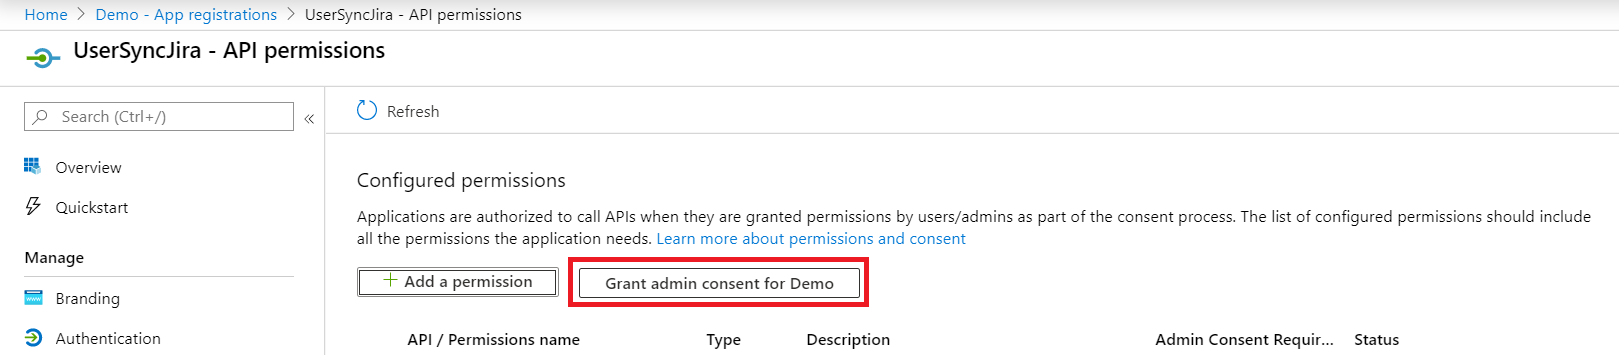 sync users, groups and directory details using Azure AD into Jira and Confluence